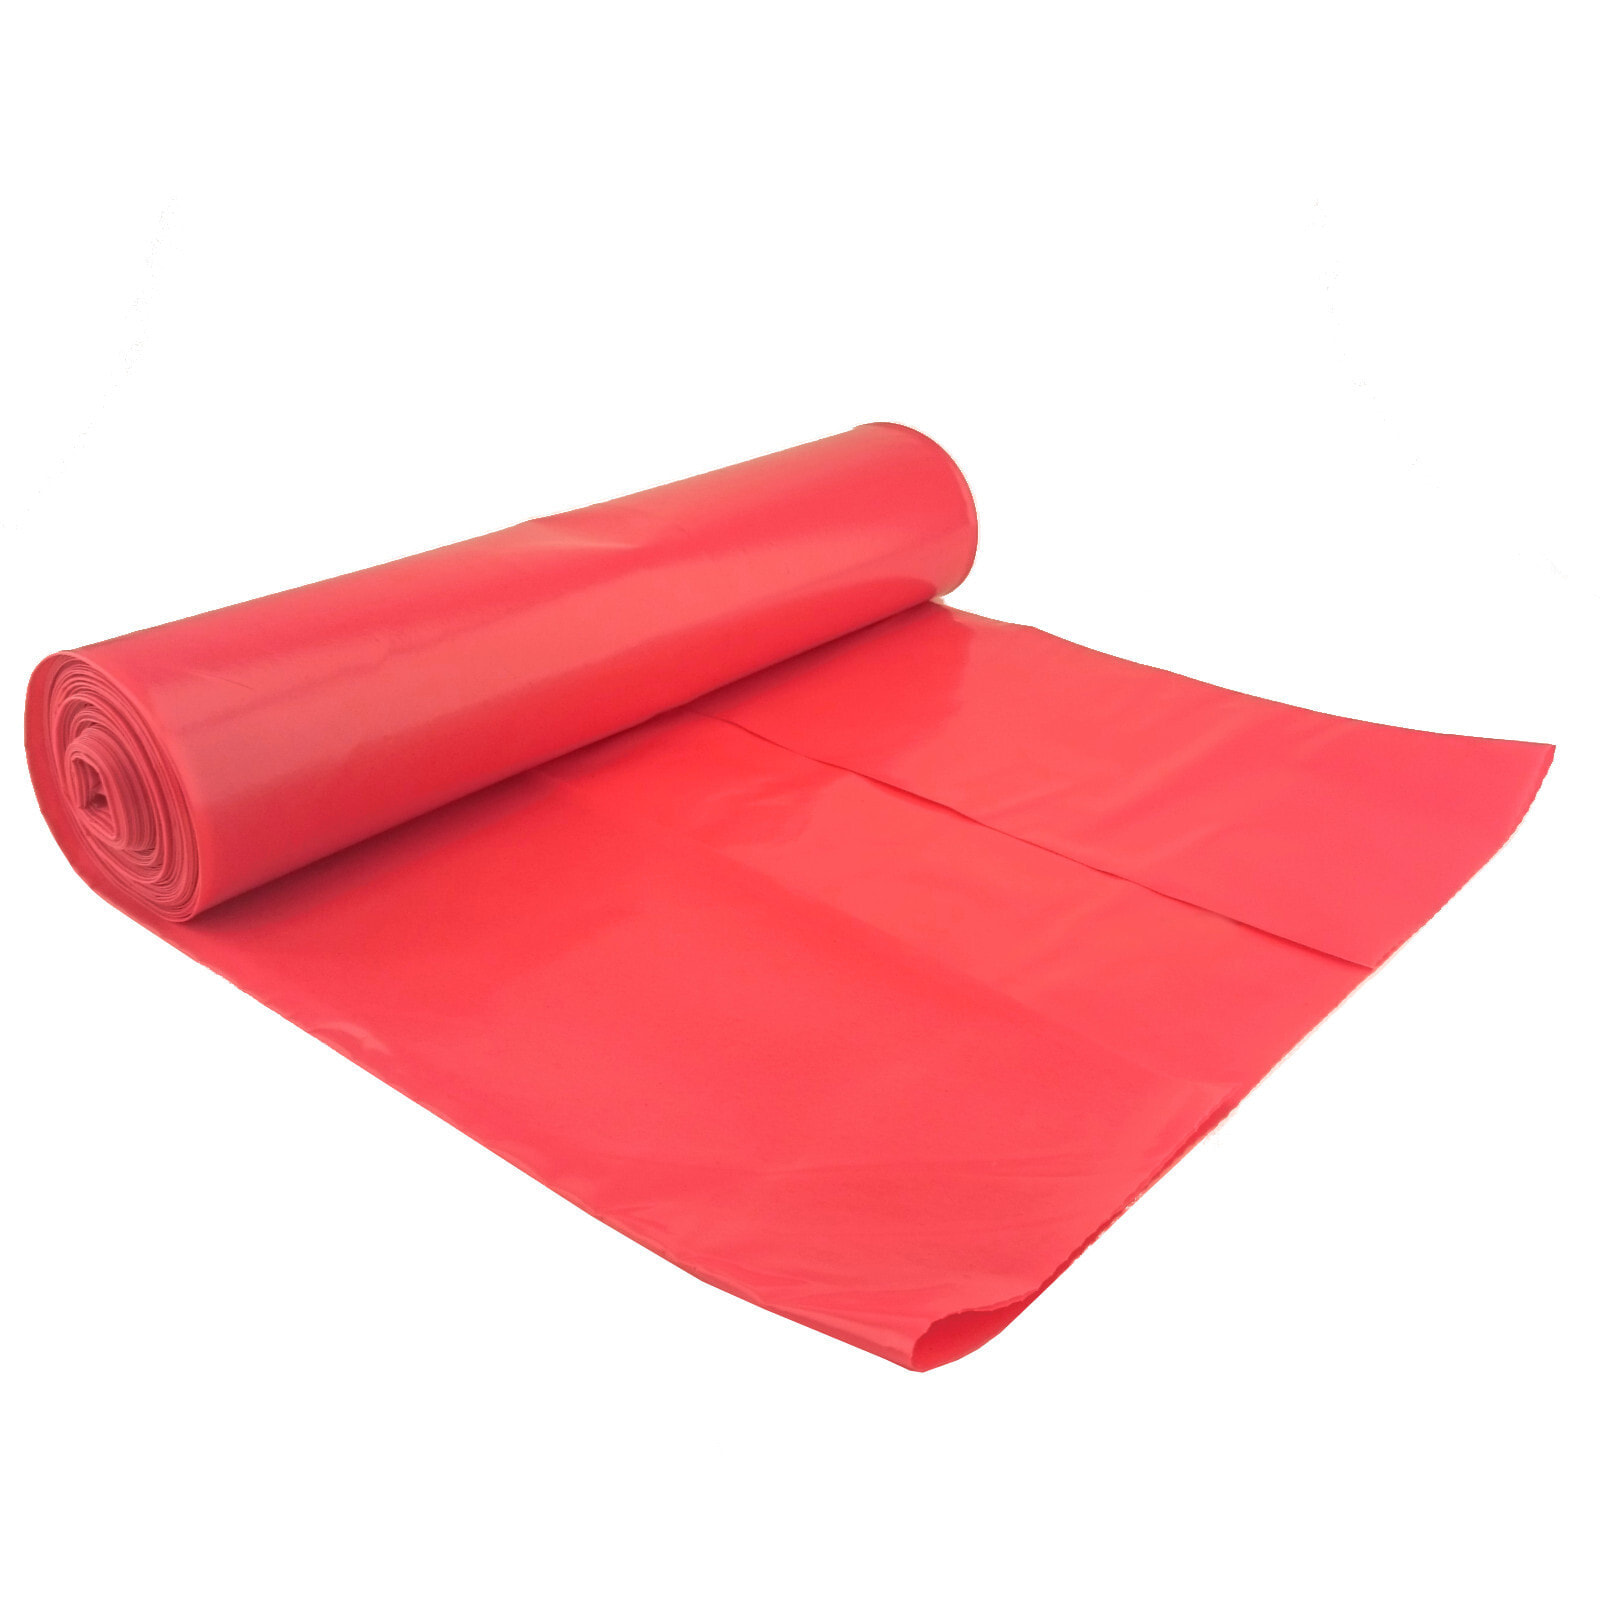 80 micron thick garbage bags. durable roll 15 pcs. - red 120L